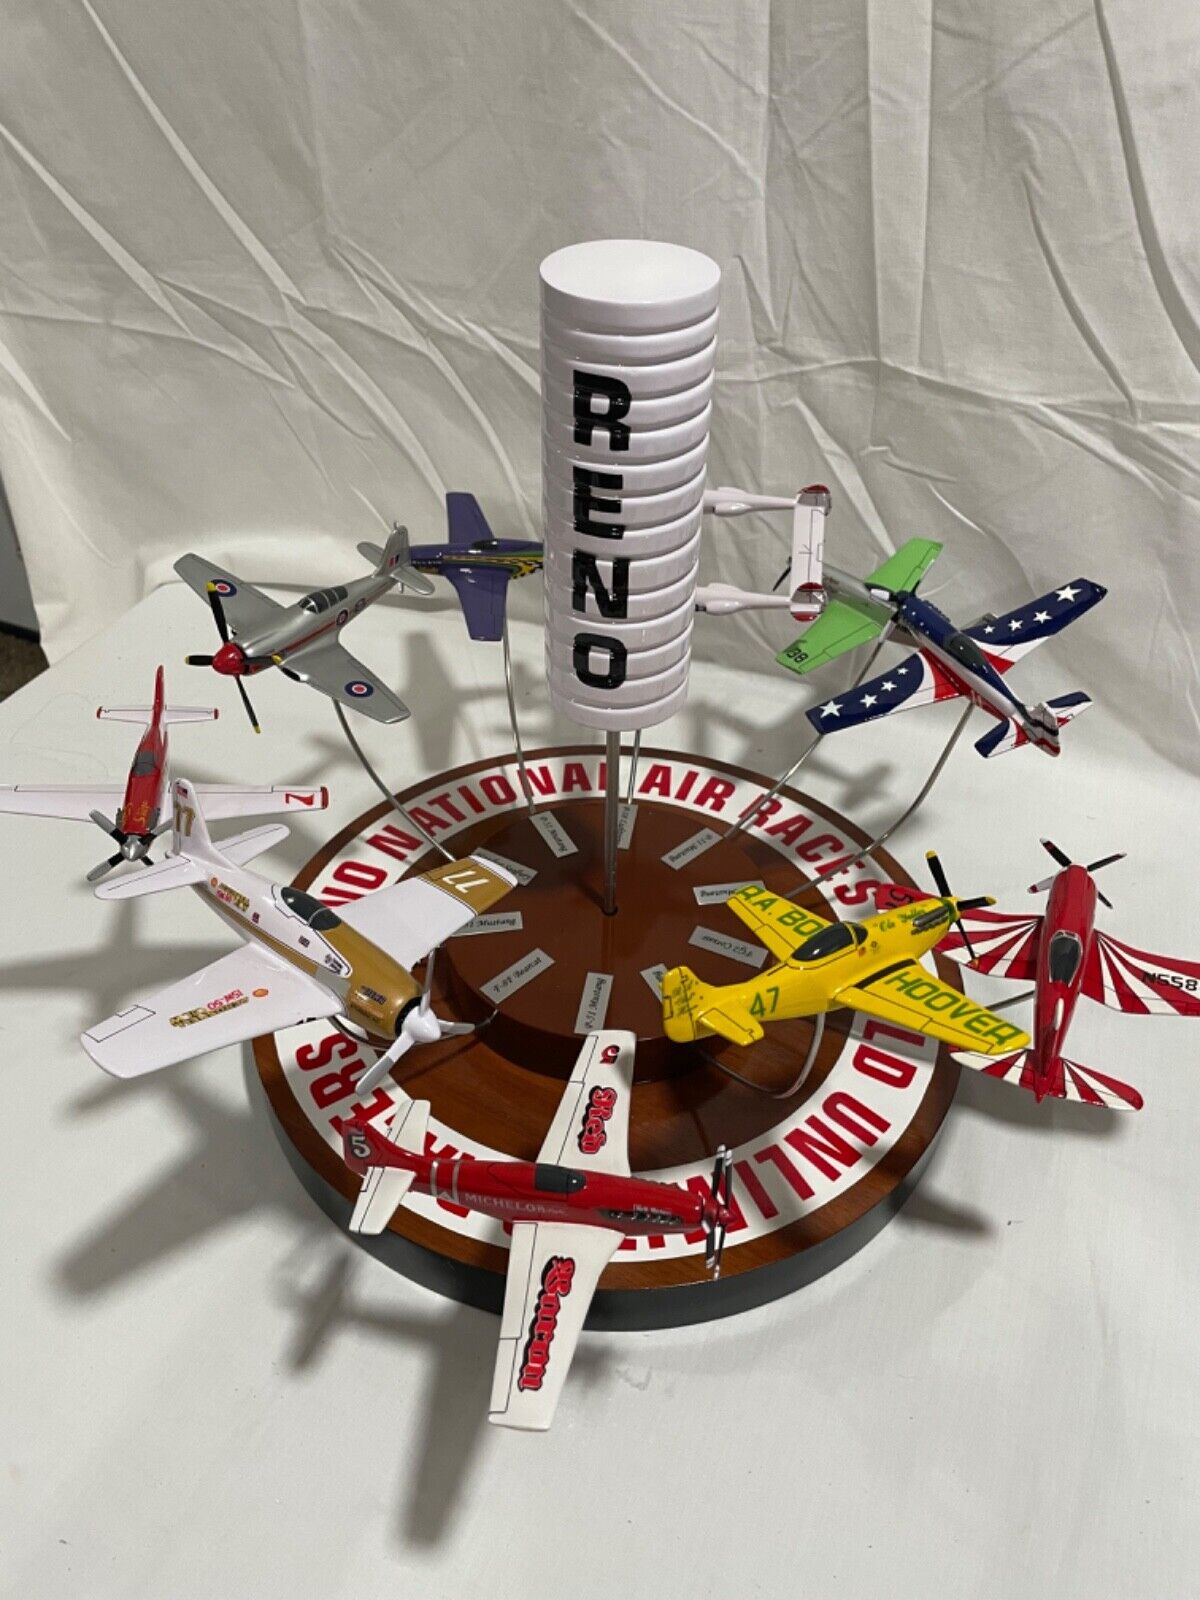 Reno National Air Racing Vintage set of unlimited class racers, 10 models